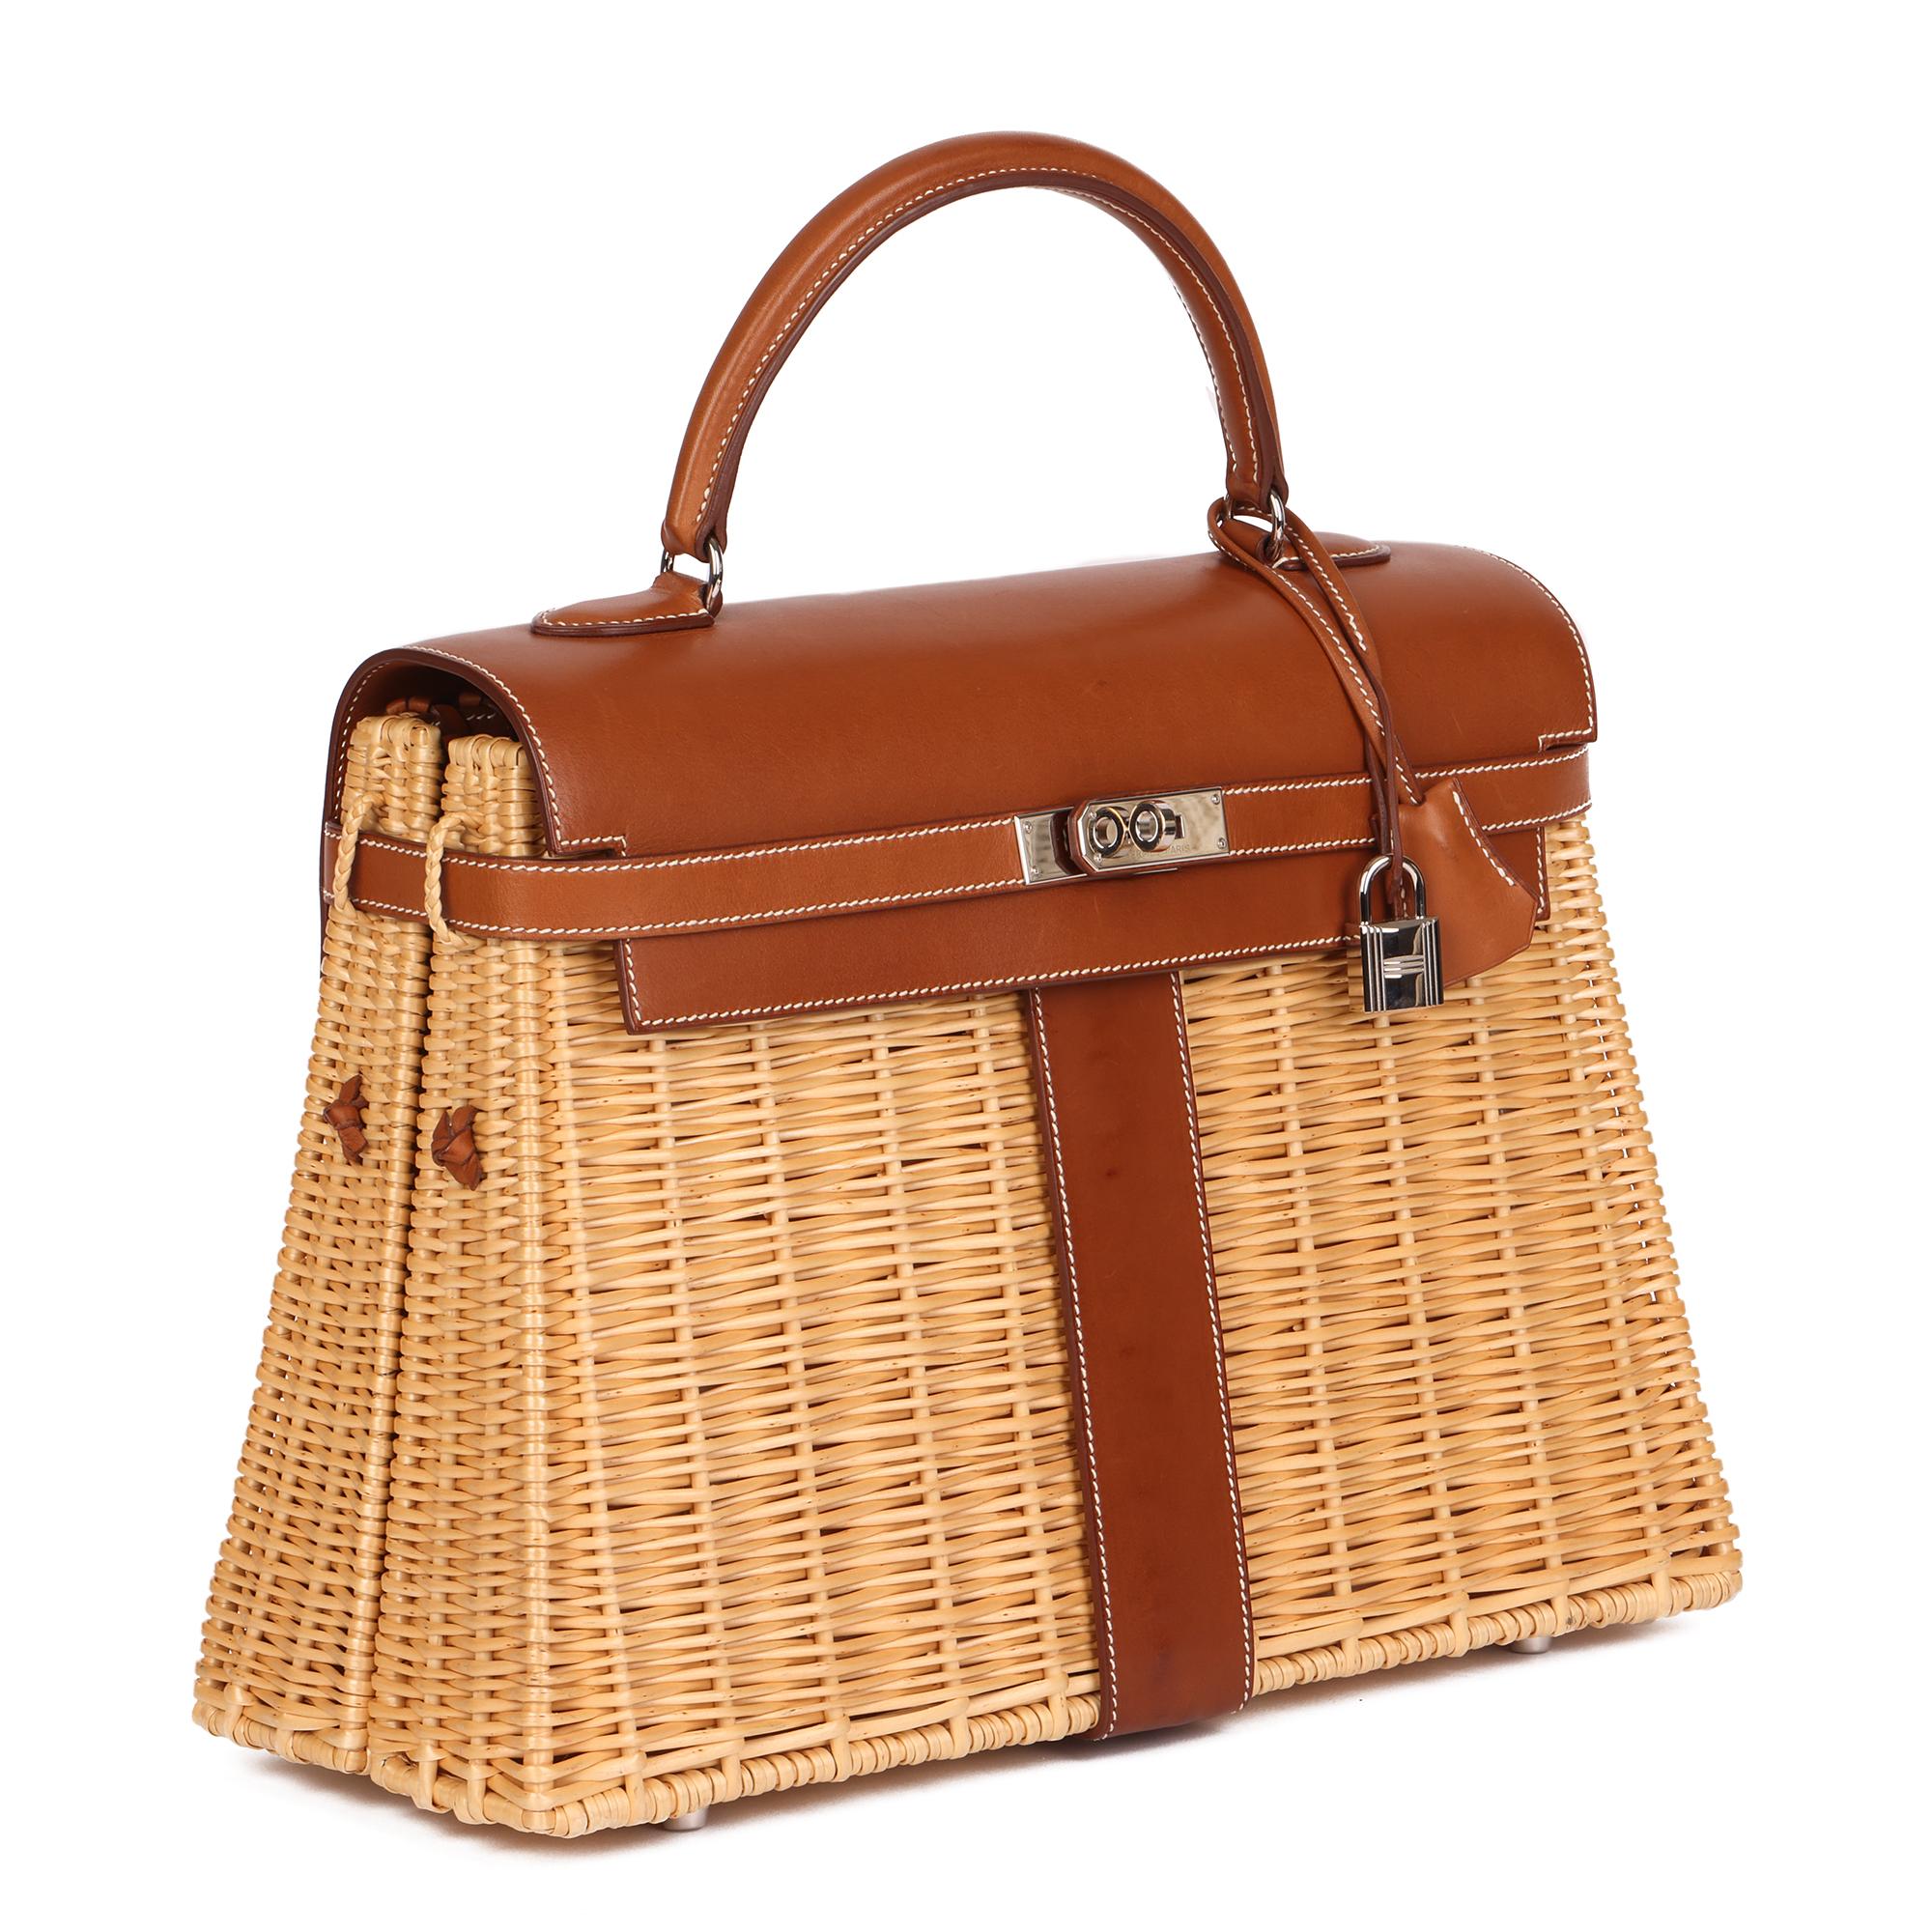 HERMÈS
Barenia Leather & Wicker Kelly 35cm Picnic

Serial Number: [O]
Age (Circa): 2011
Accompanied By: Hermès Dust Bag, Box, Rain Cover, Invoice, Lock, Keys, Clochette
Authenticity Details: Date Stamp (Made in France) 
Gender: Ladies
Type: Top